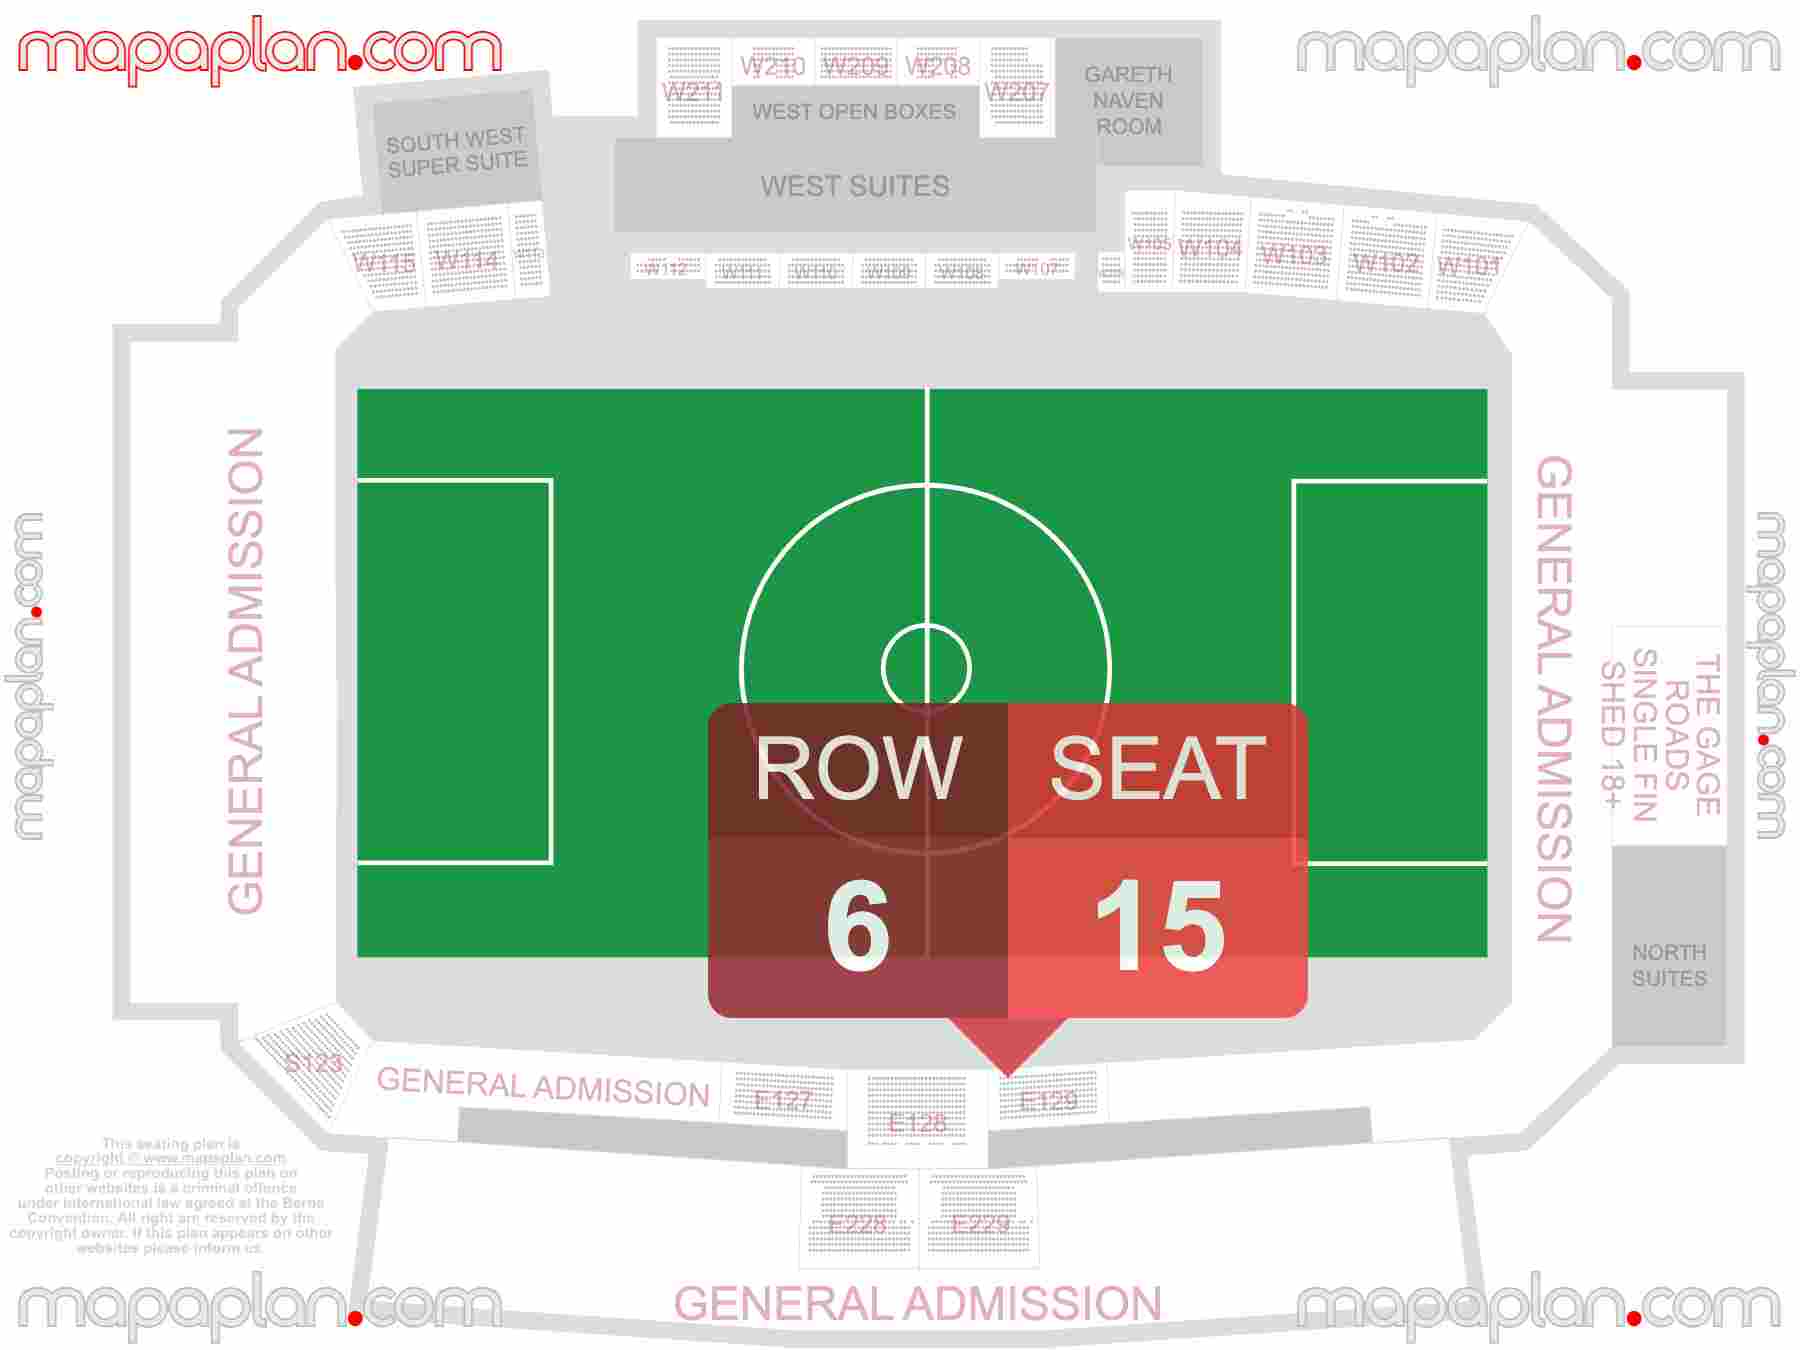 Perth HBF Park Rectangular Stadium seating map Soccer football with general admission layout seating map with exact section numbers showing best rows and seats selection 3d layout - Best interactive seat finder tool with precise detailed location data